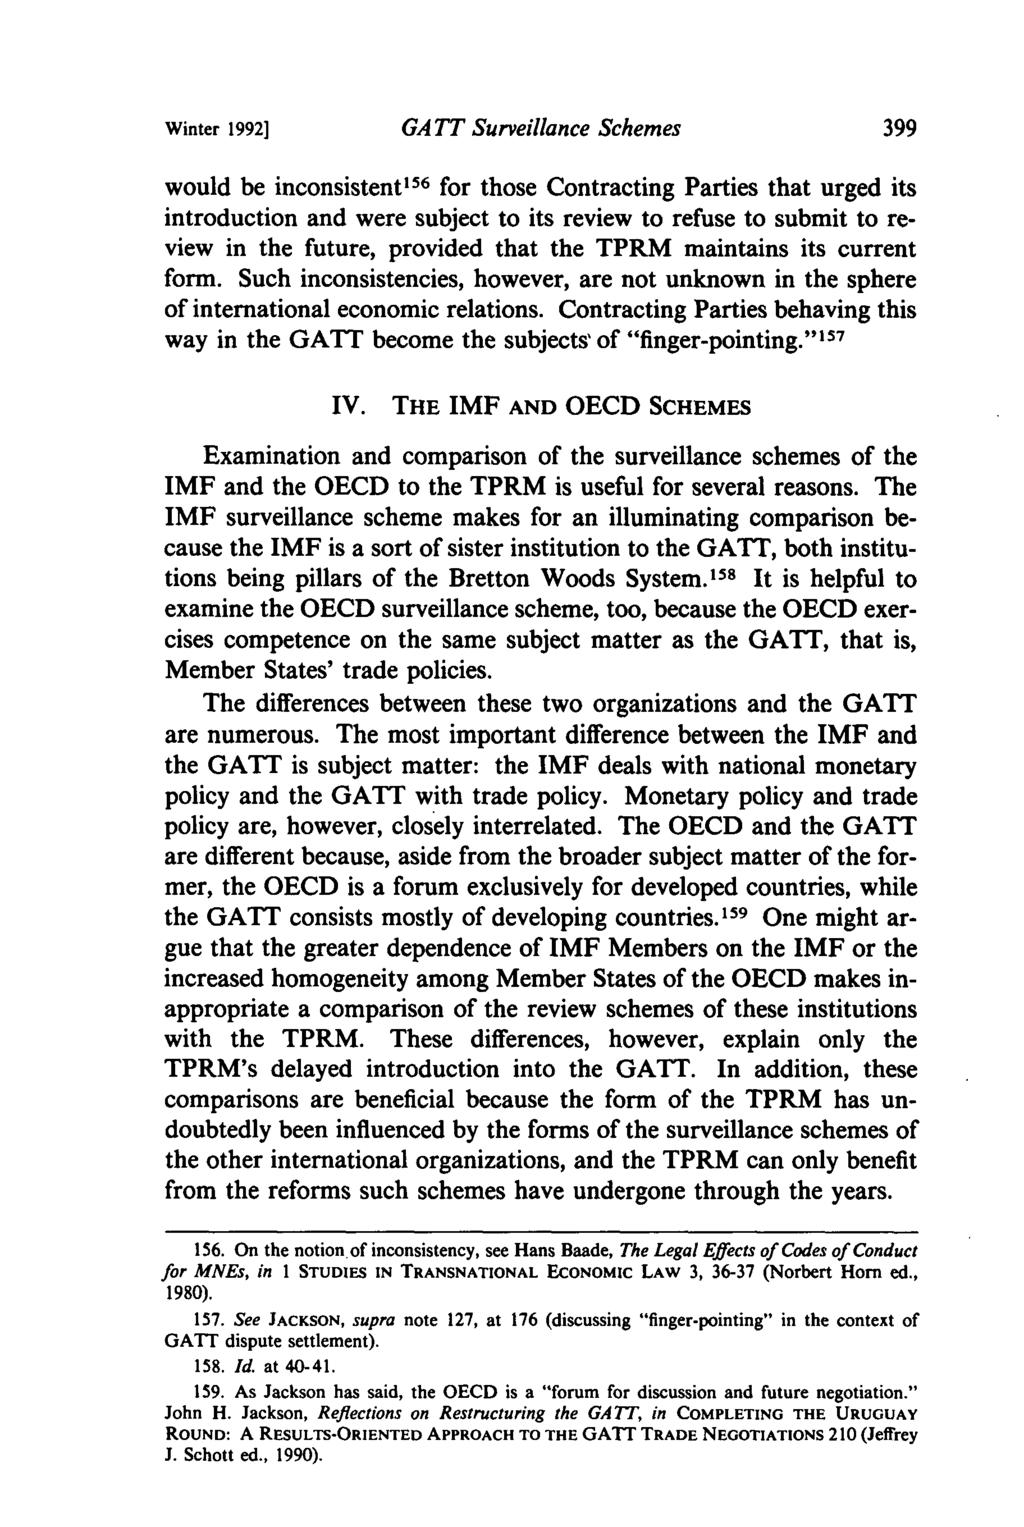 Winter 1992] GA TT Surveillance Schemes would be inconsistent 56 for those Contracting Parties that urged its introduction and were subject to its review to refuse to submit to review in the future,